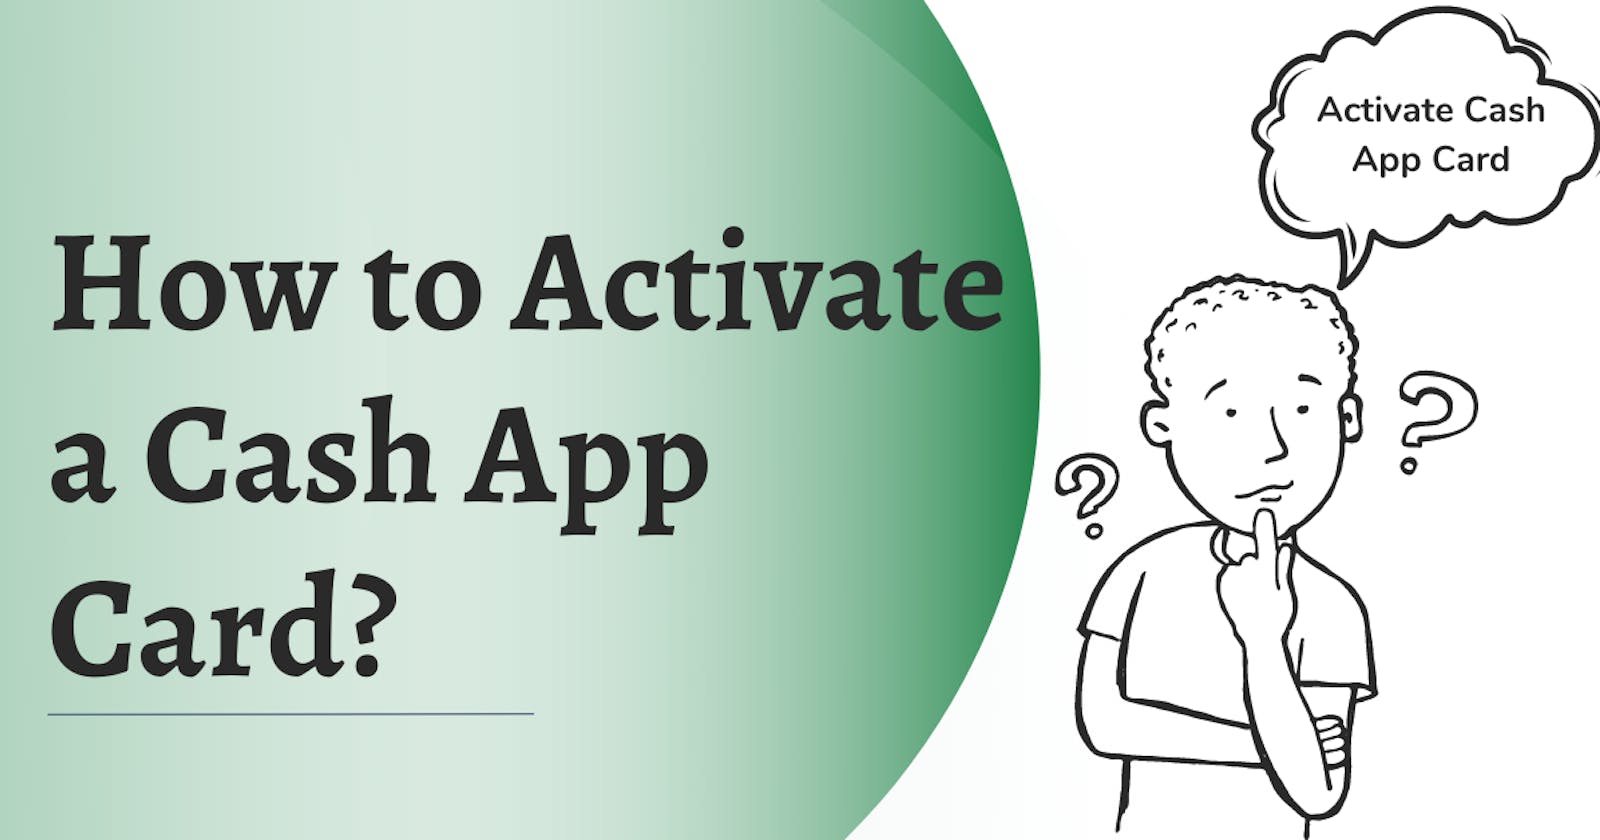 How to Activate Cash App Card? Complete Easy Guide